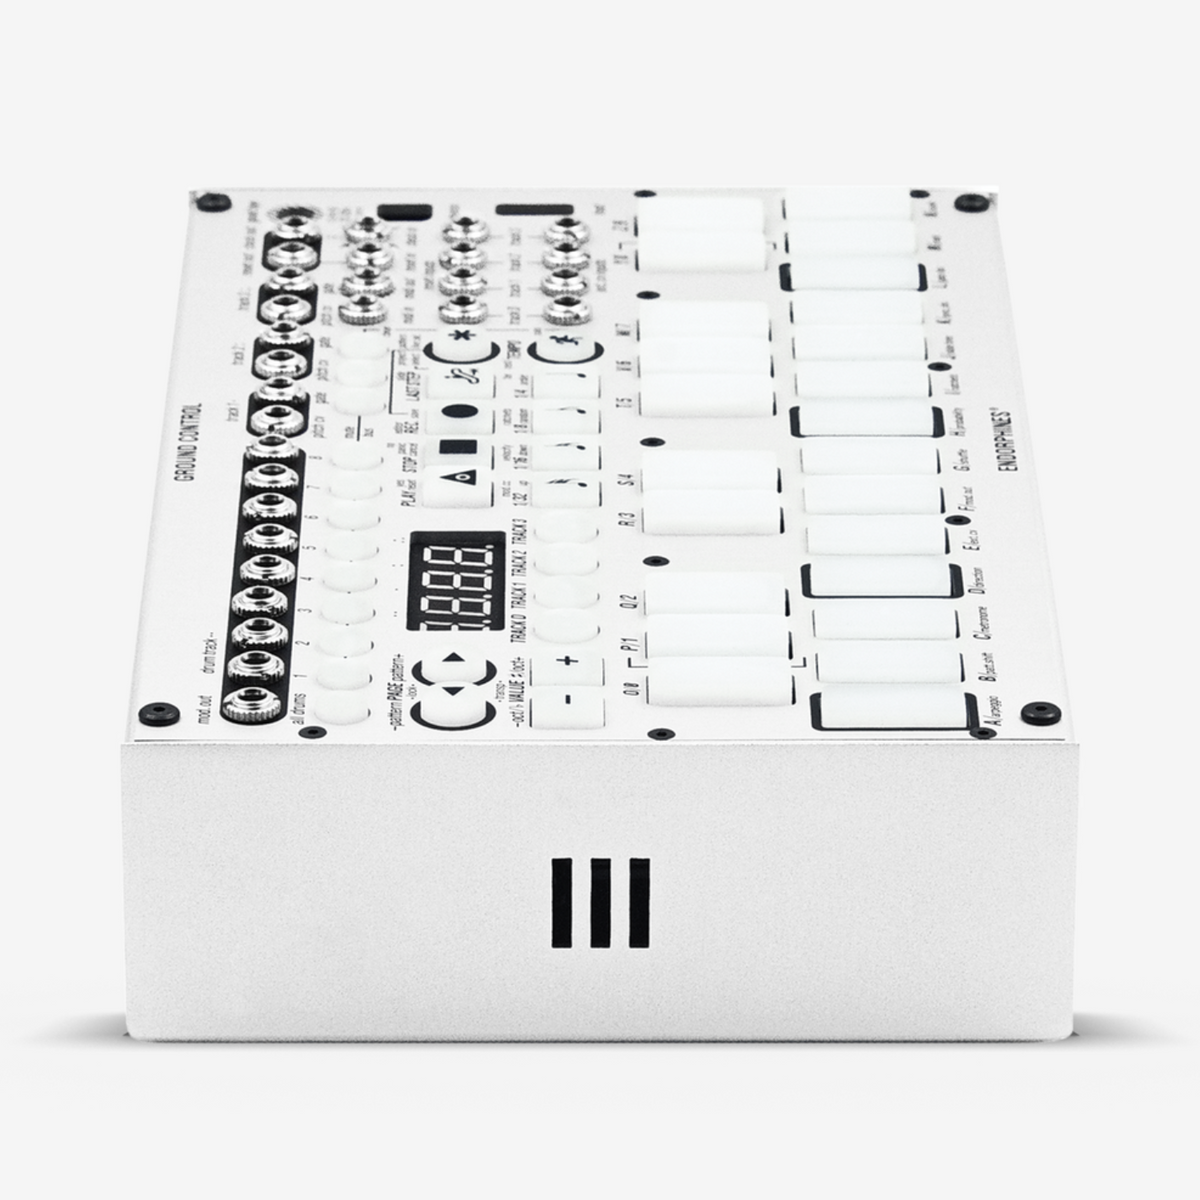 Endorphin.es Ground Control Standalone Performance Sequencer (Silver)